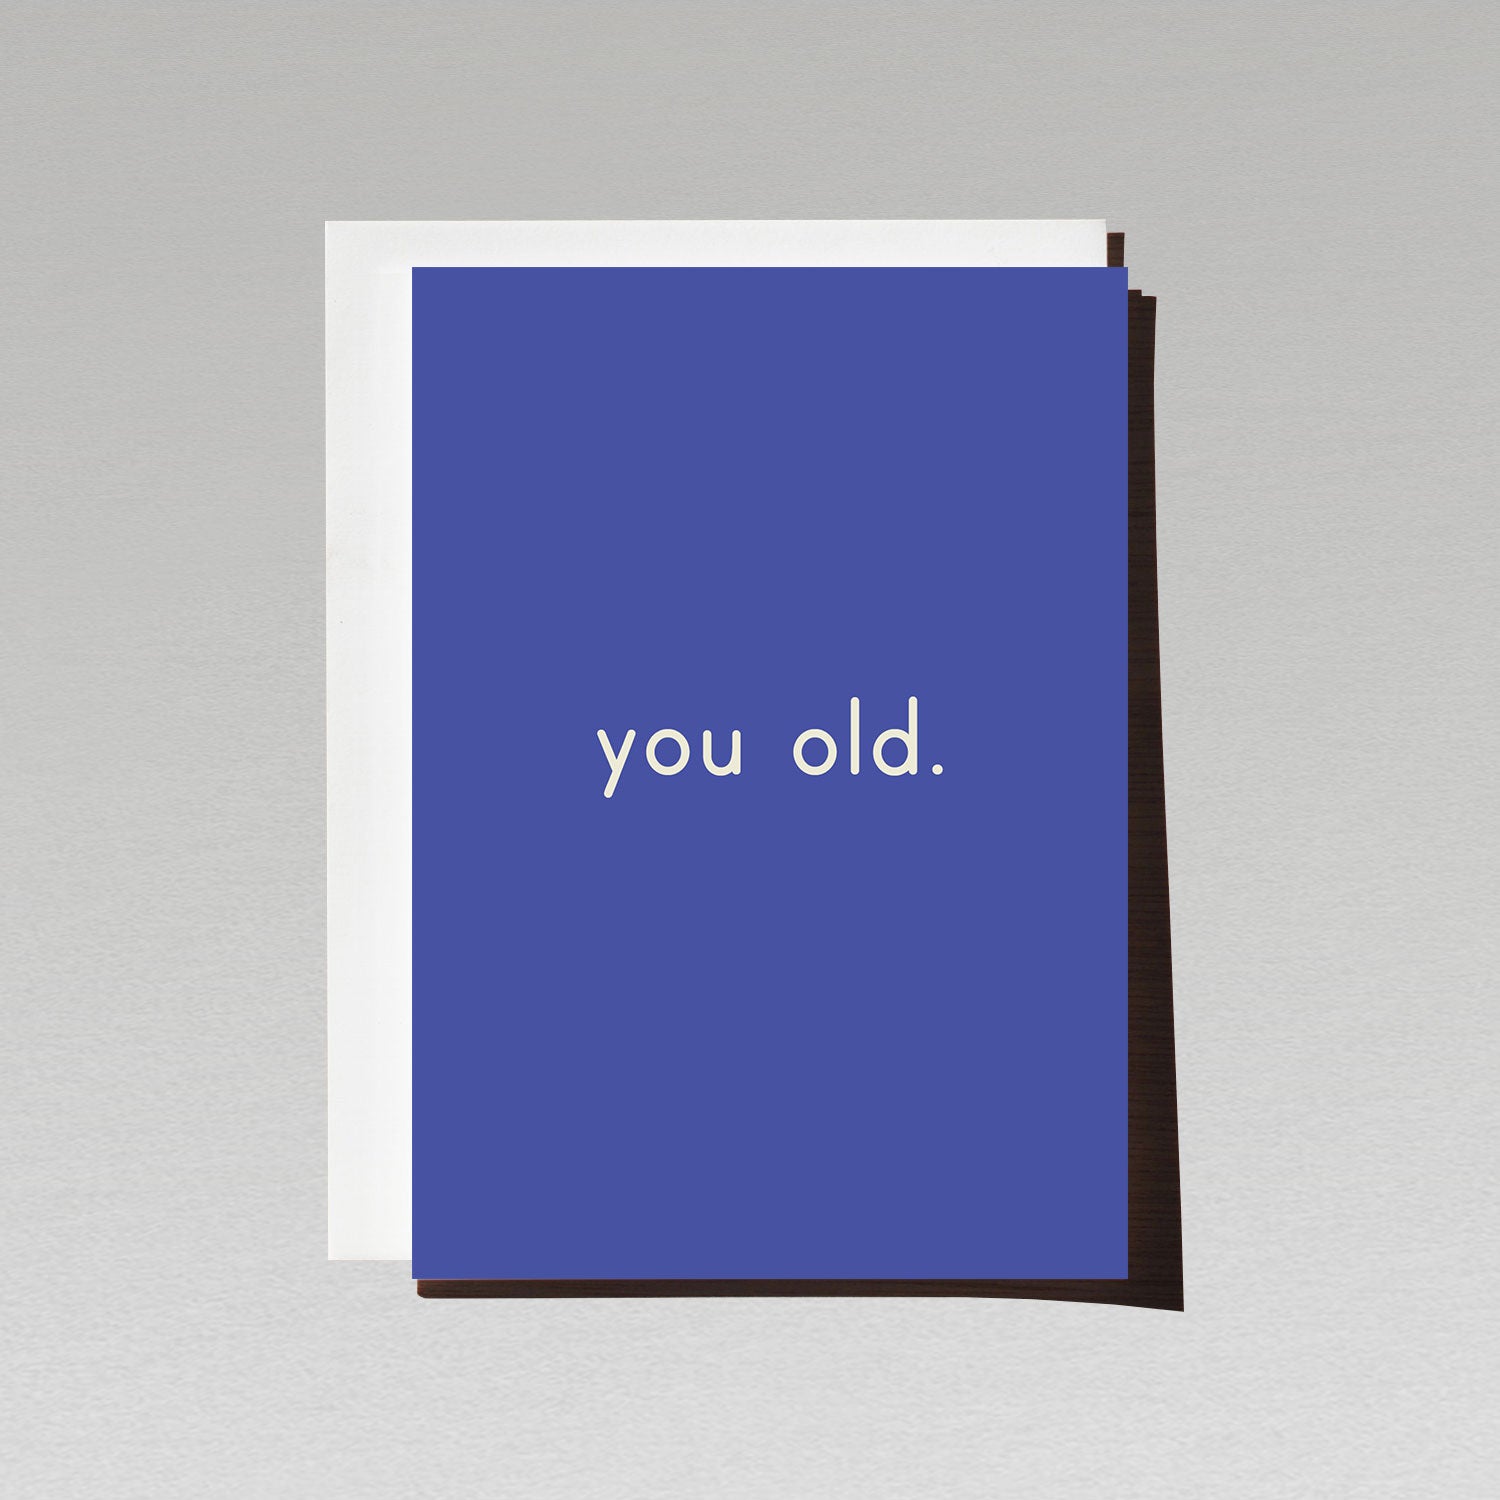 Birthday card with minimalist white text you old. on blue background